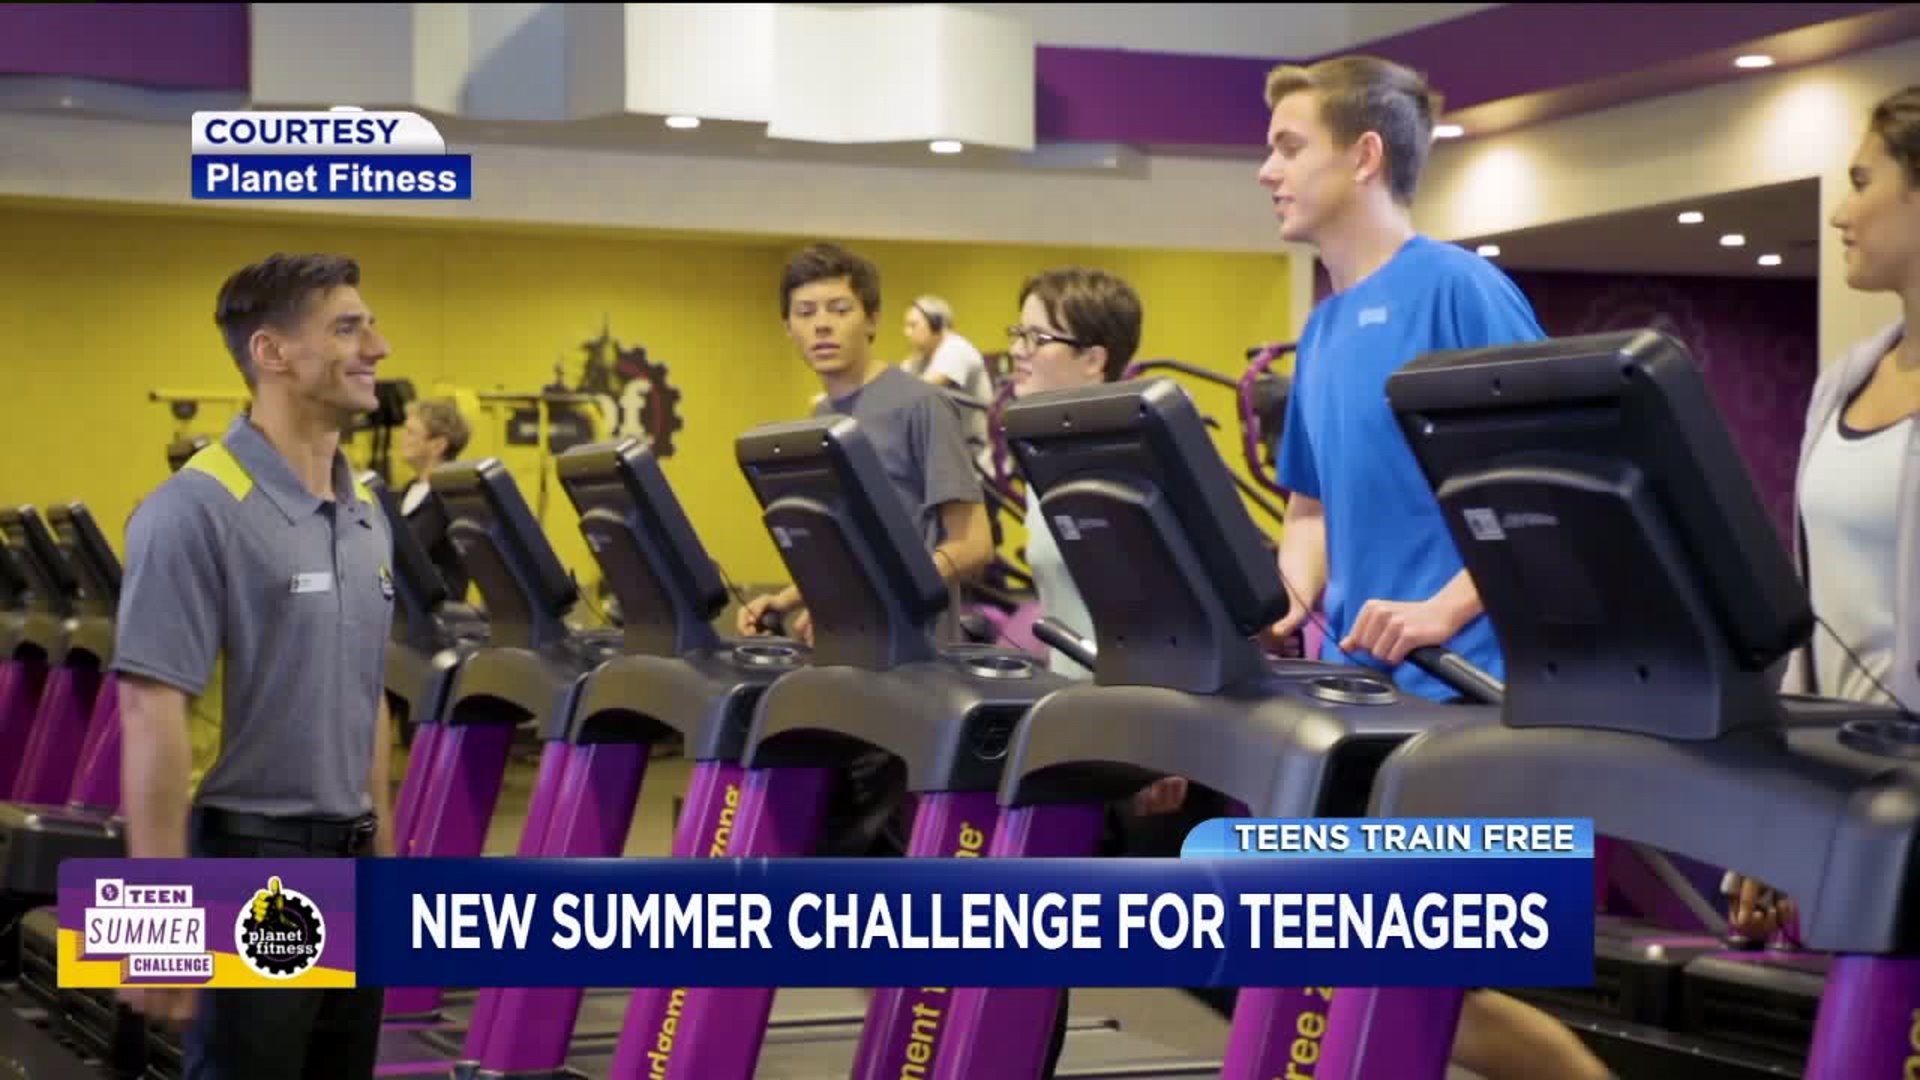 Planet Fitness Freebie for Teens